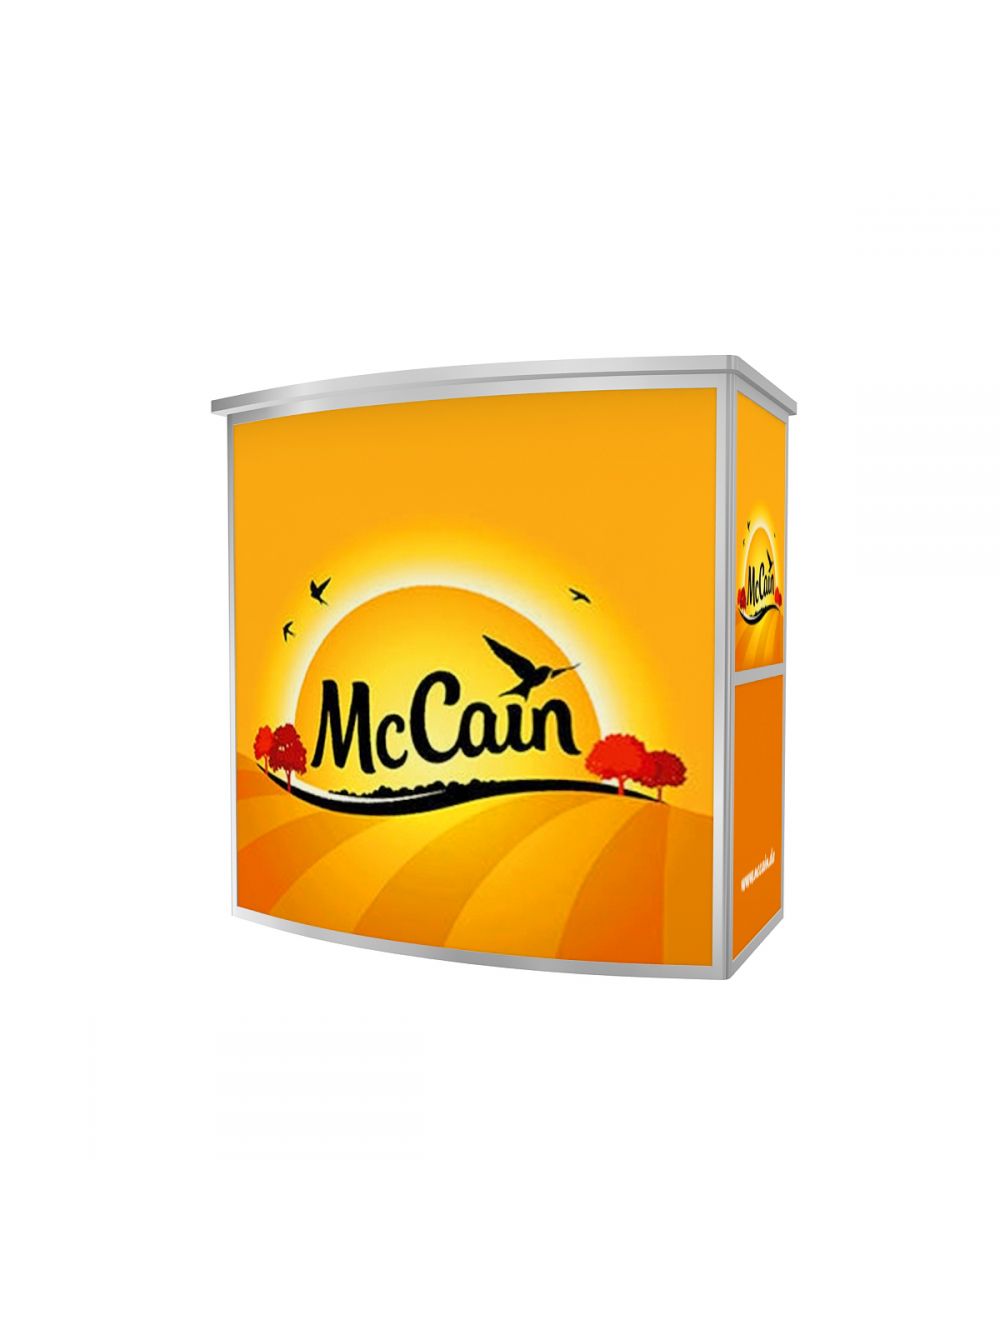 McCain Foods on LinkedIn: #investment #food | 11 comments